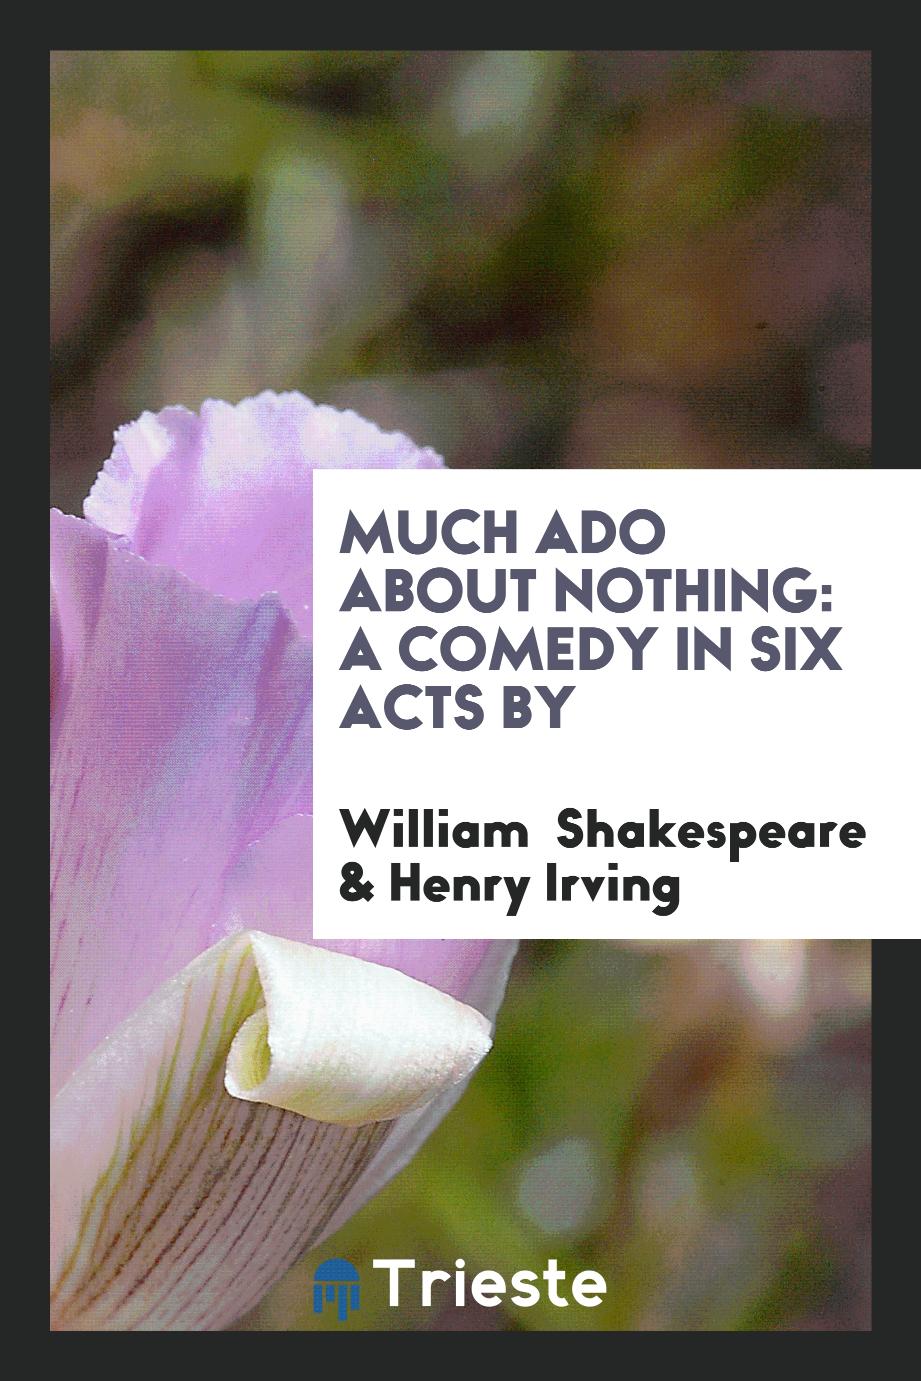 Much Ado about Nothing: A Comedy in Six Acts by